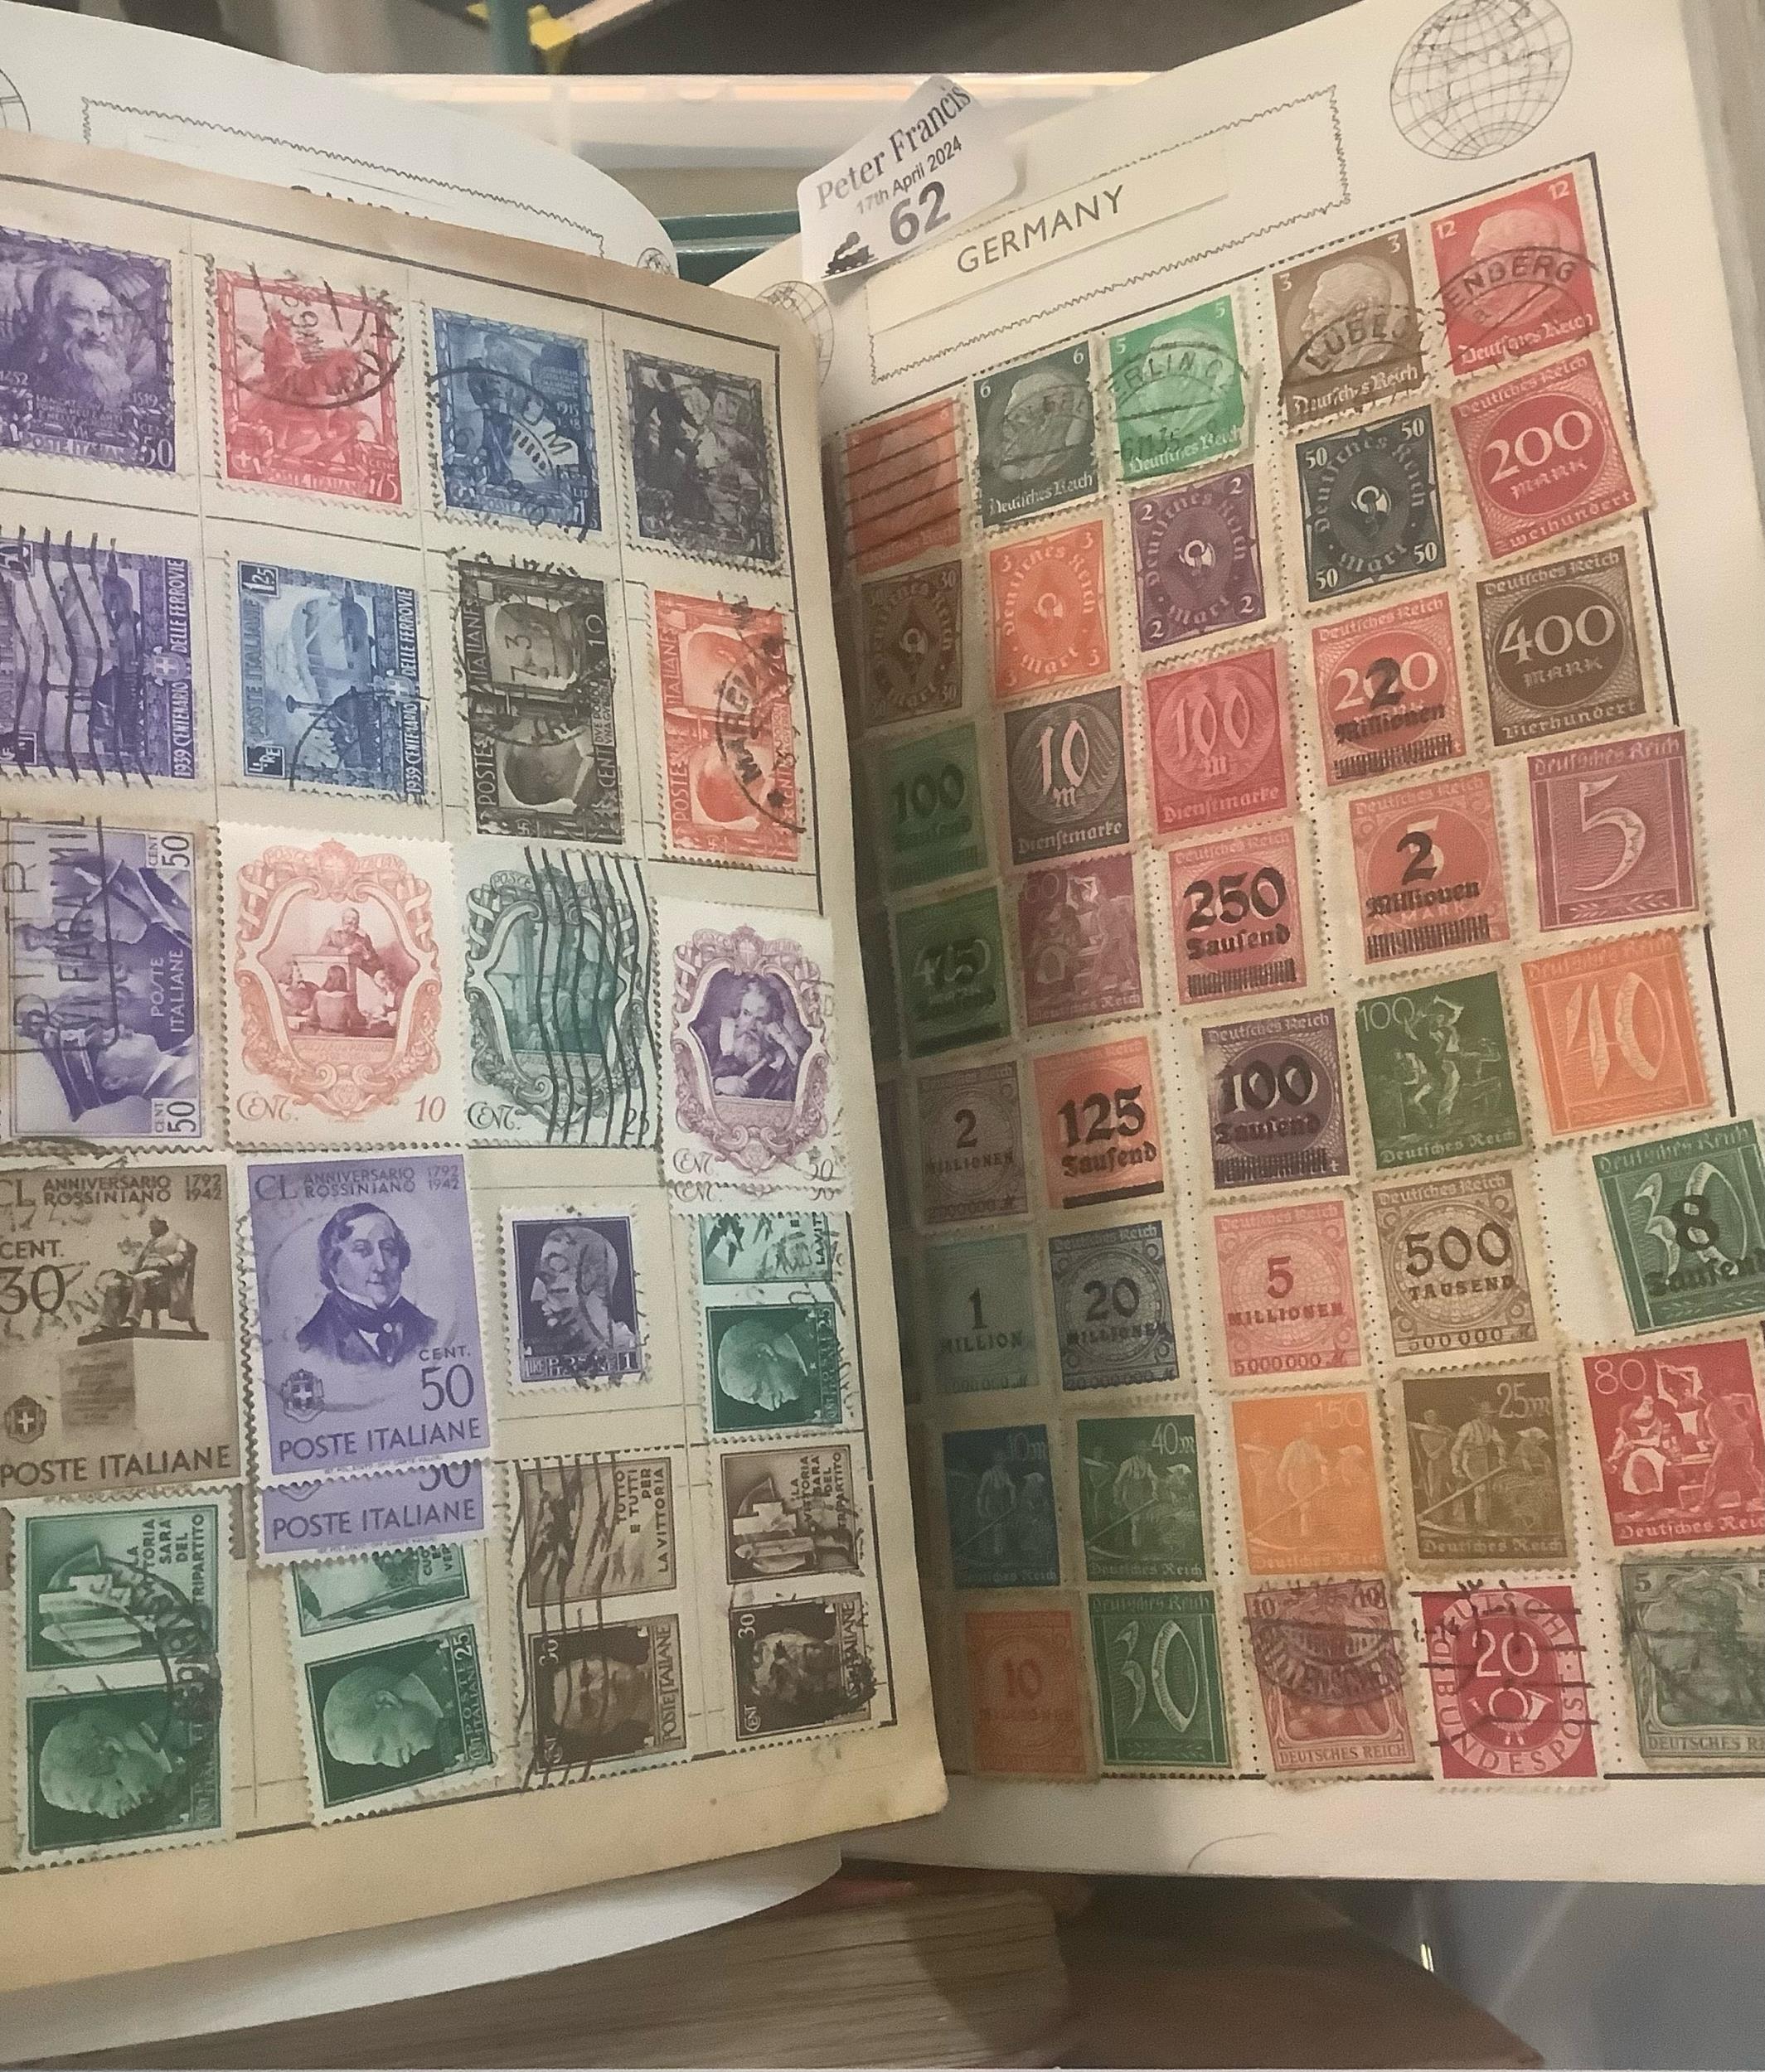 All World stamp collection in various old albums. Many 100s of stamps, mostly used. (B.P. 21% + VAT)